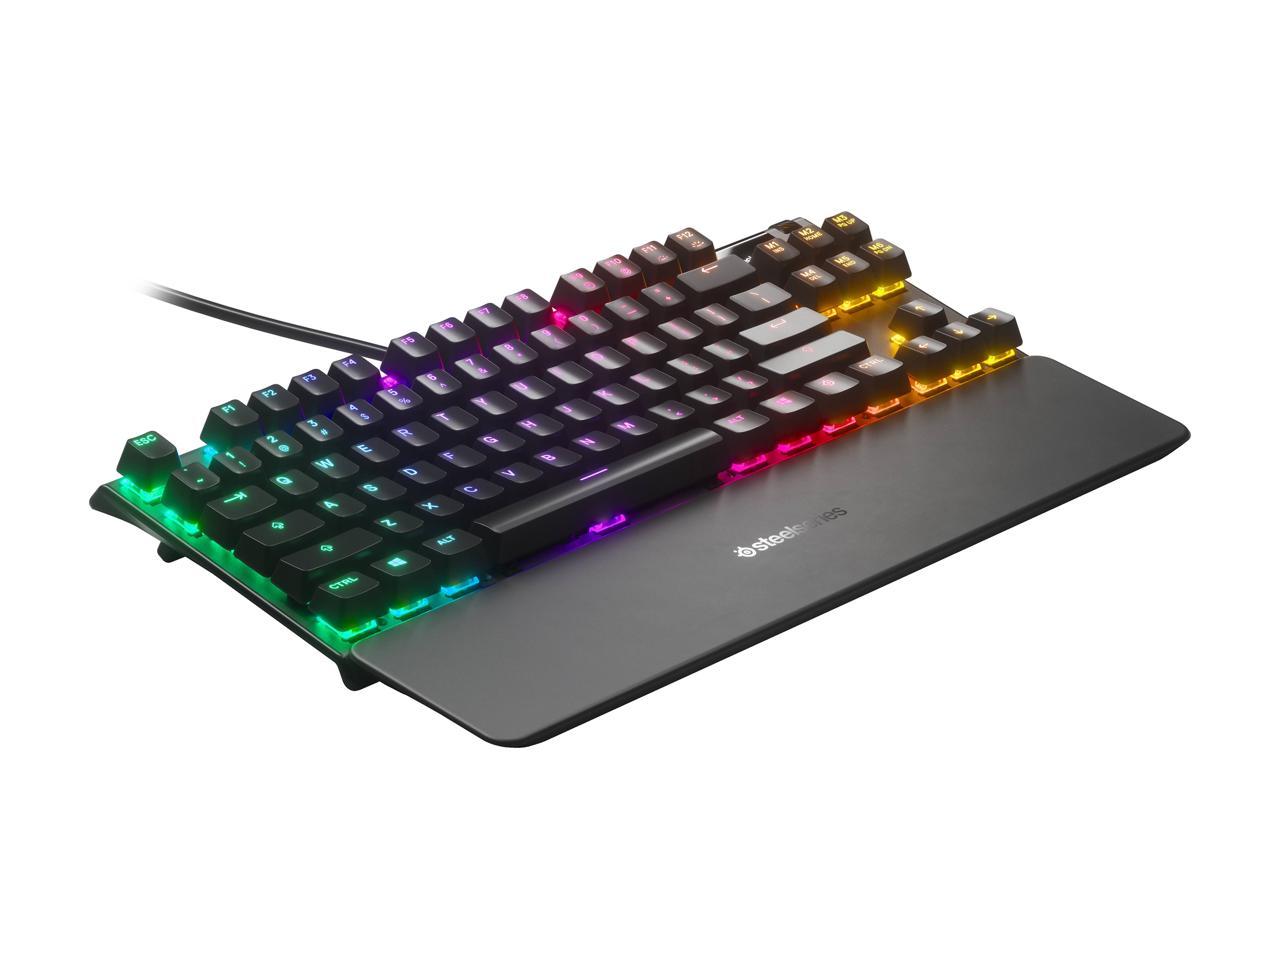 Steelseries Apex Pro Tkl Mechanical Gaming Keyboard World S Fastest Mechanical Switches Oled Smart Display Compact Form Factor Rgb Backlit Newegg Com